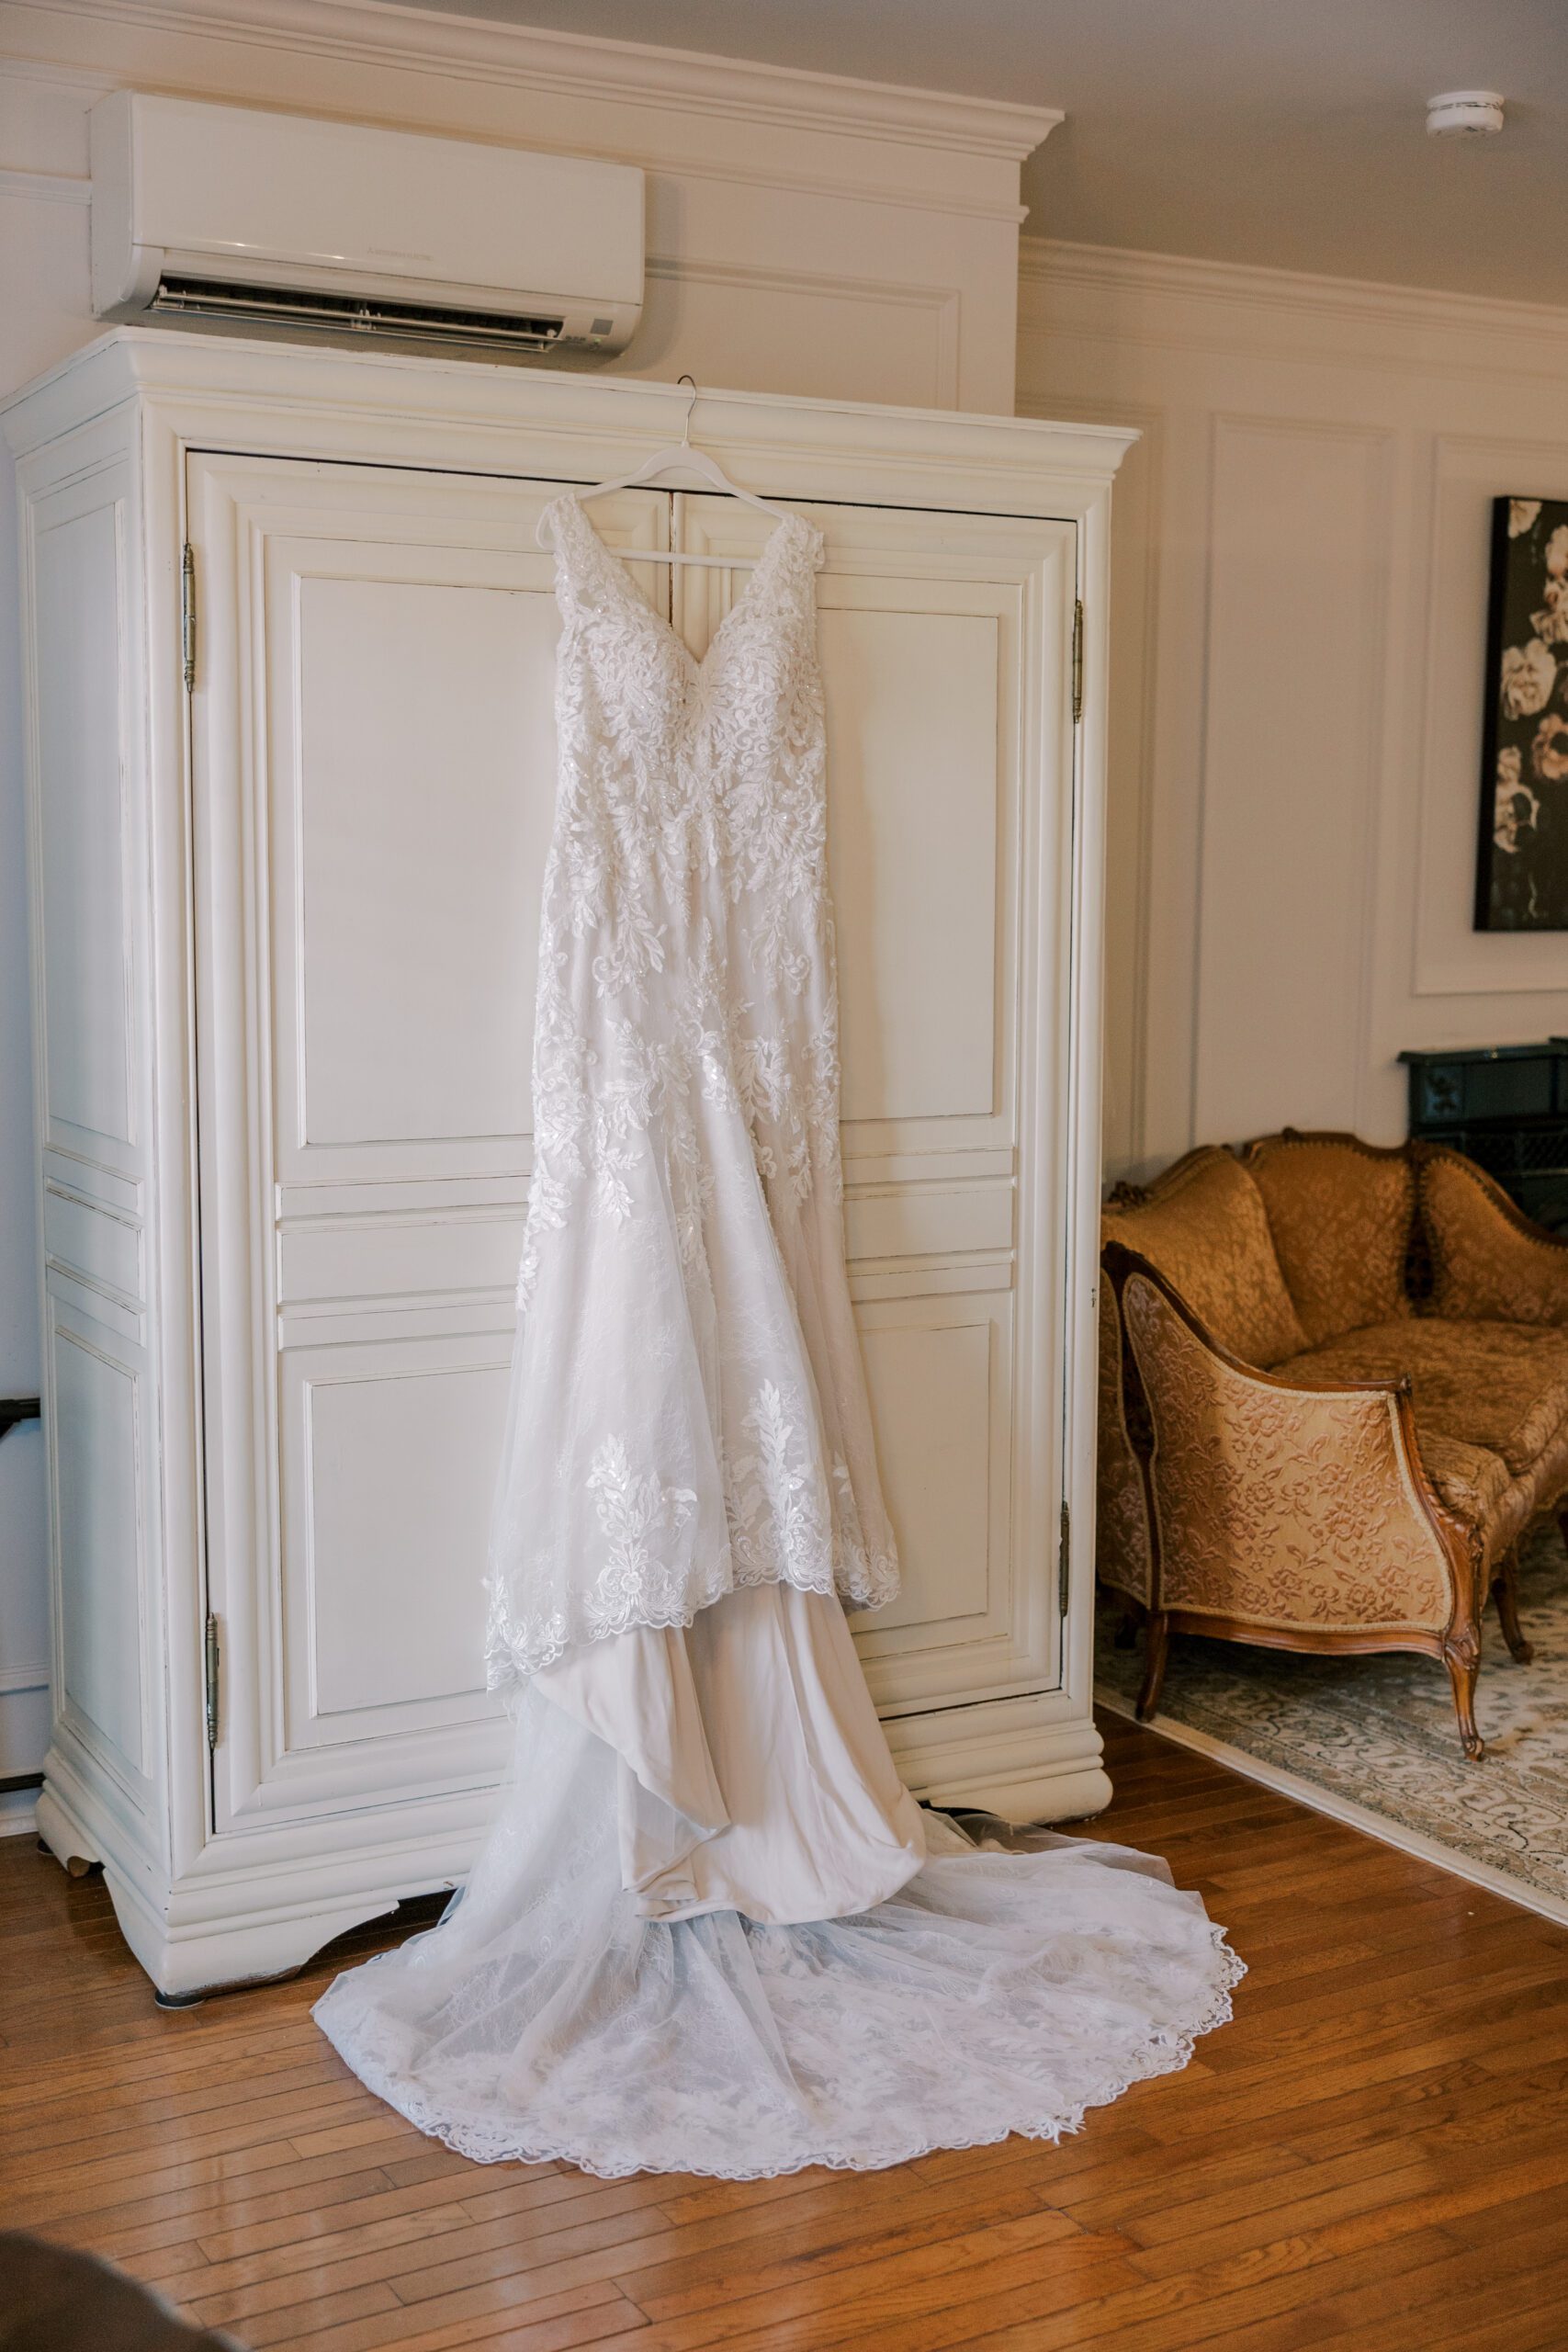 Wedding gown hanging on a white armoire, wooden floors and a gold colored couch in background